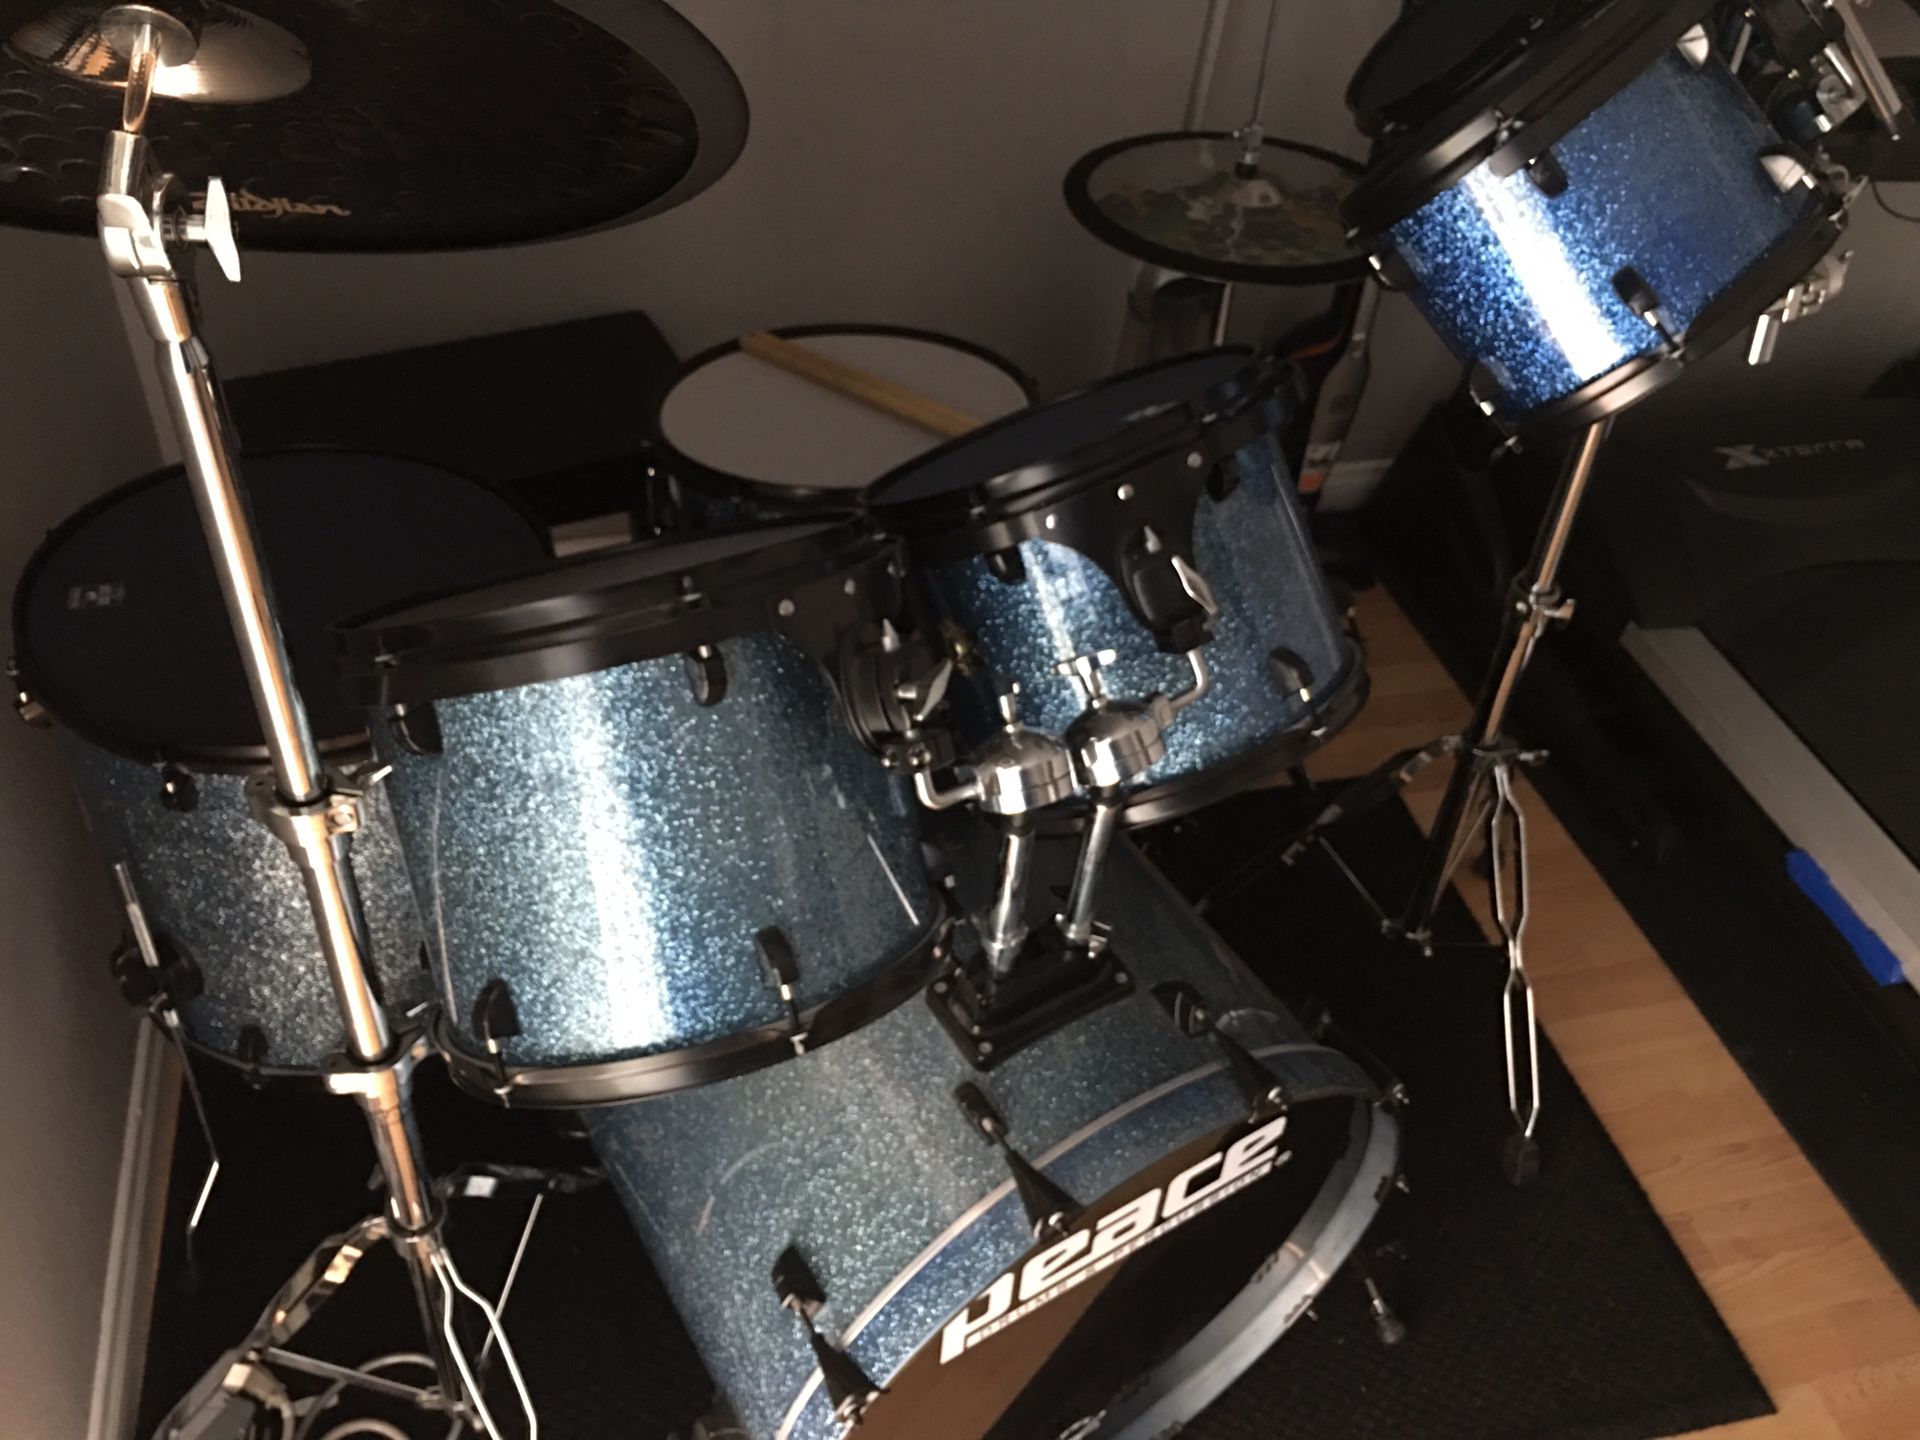 Drum Set - Like New - Peace DNA - Full Set Up with Accessories